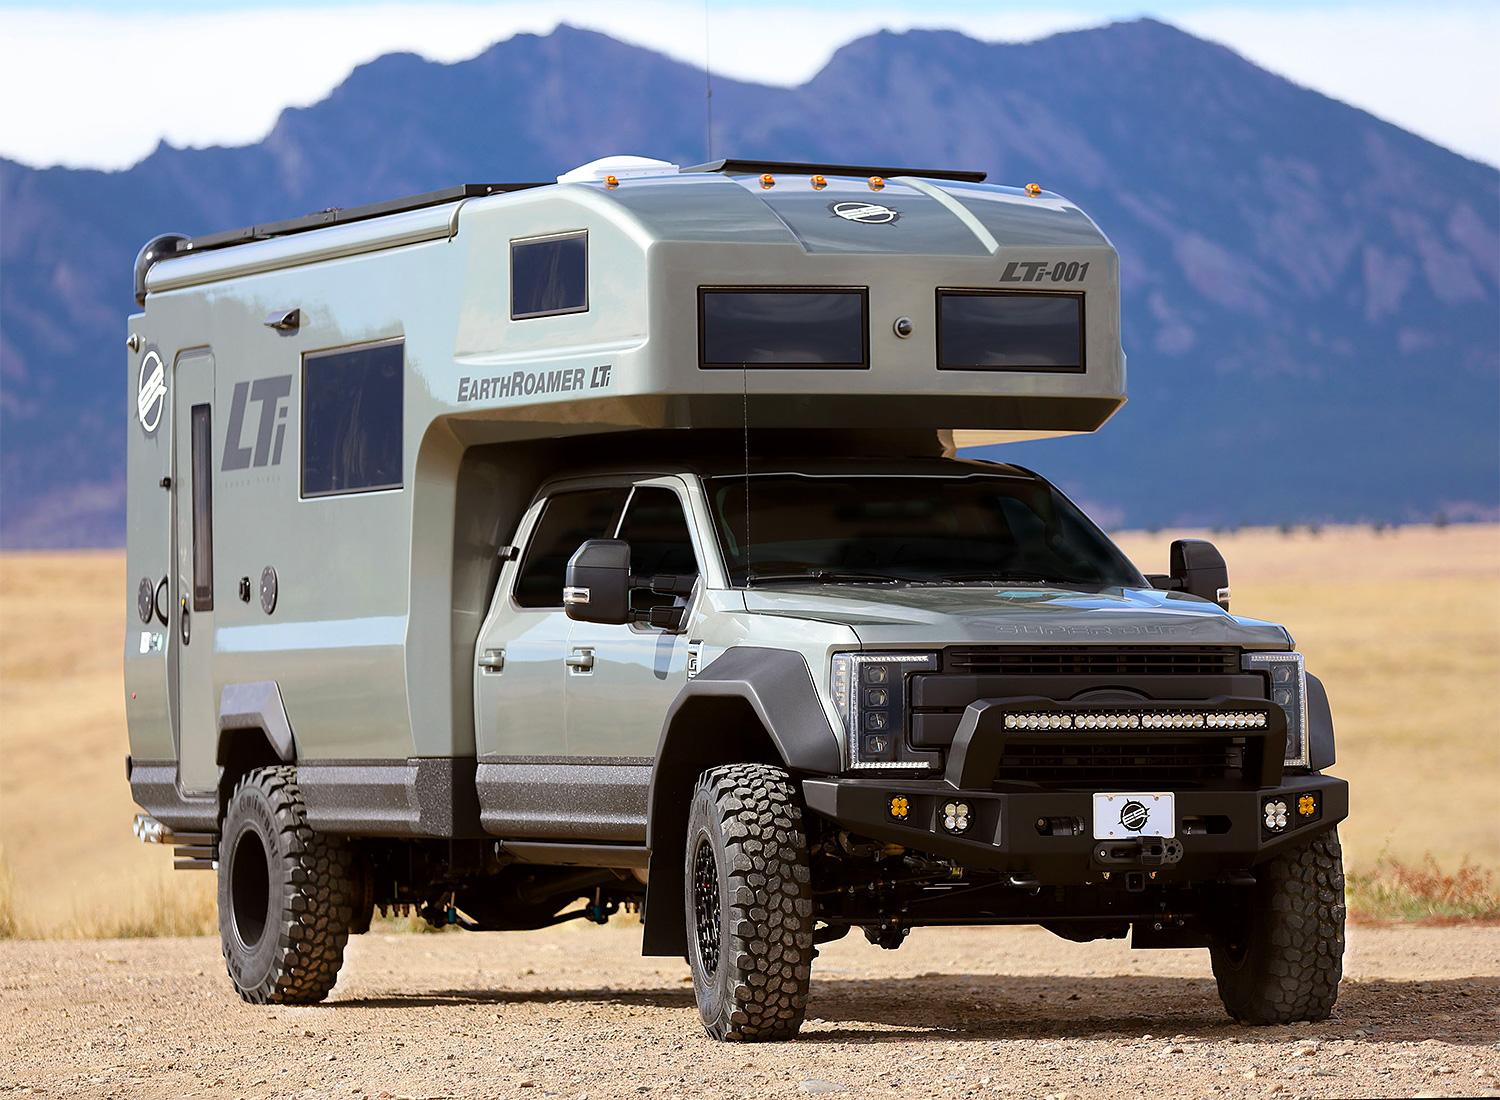 The EarthRoamer LTi is the Ultimate Overland RV